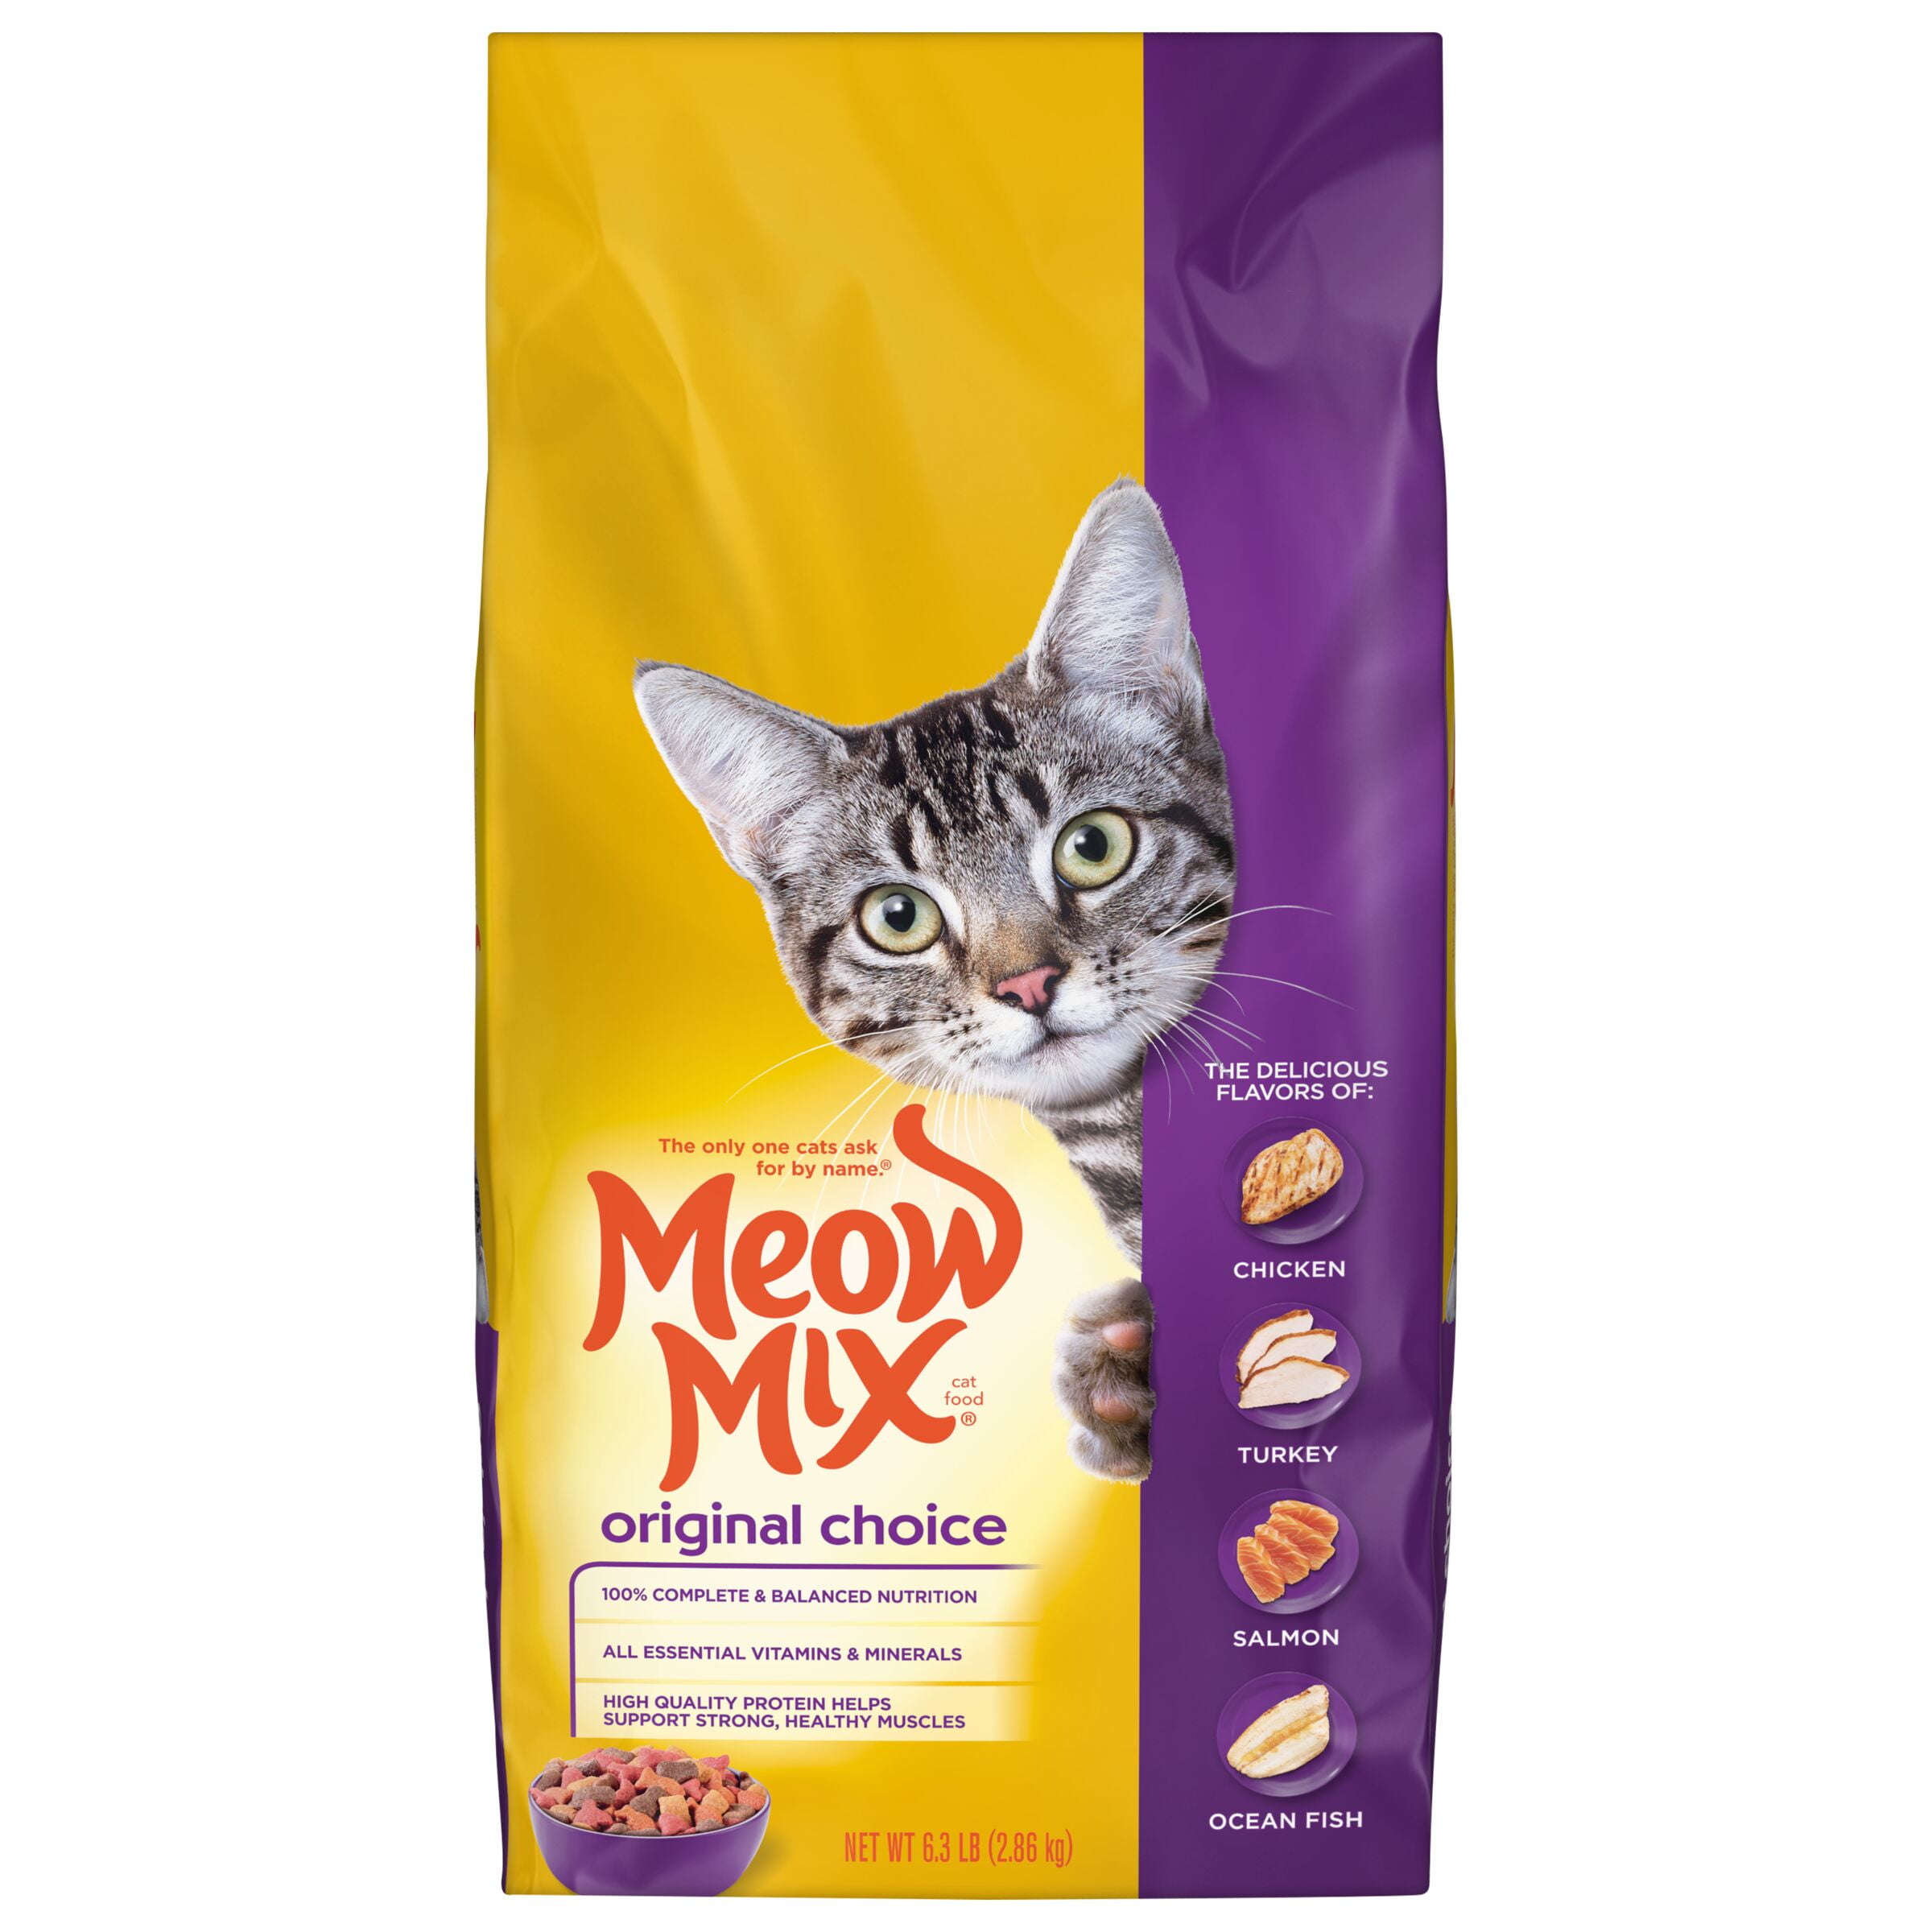 Meow Mix Original Choice Dry Cat Food, 30 Pounds picture